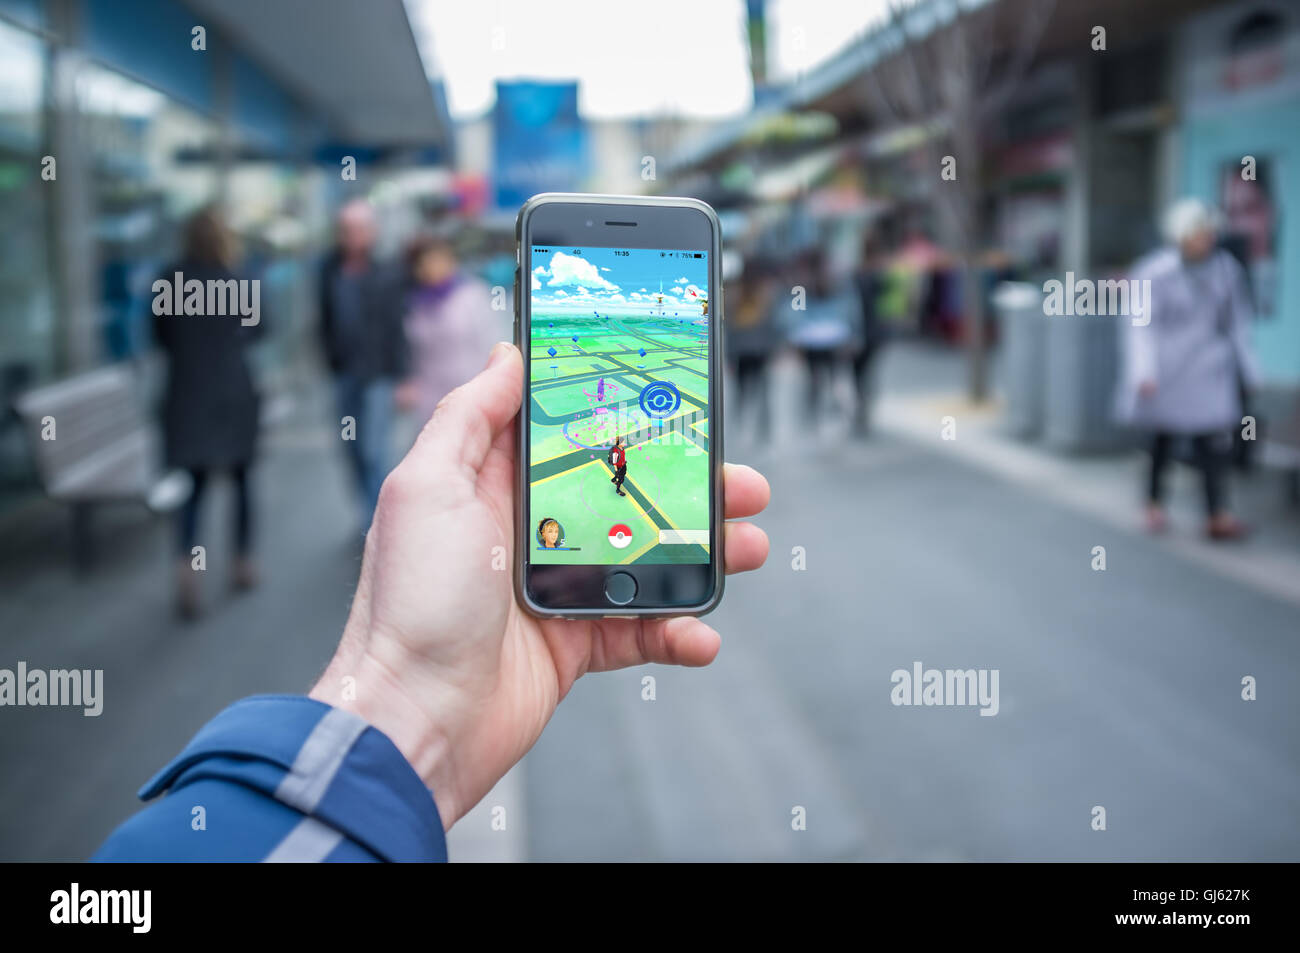 Melbourne, Australia - August 12, 2016: Male hand holding iPhone 6 with Pokemon Go game  on a busy street Stock Photo